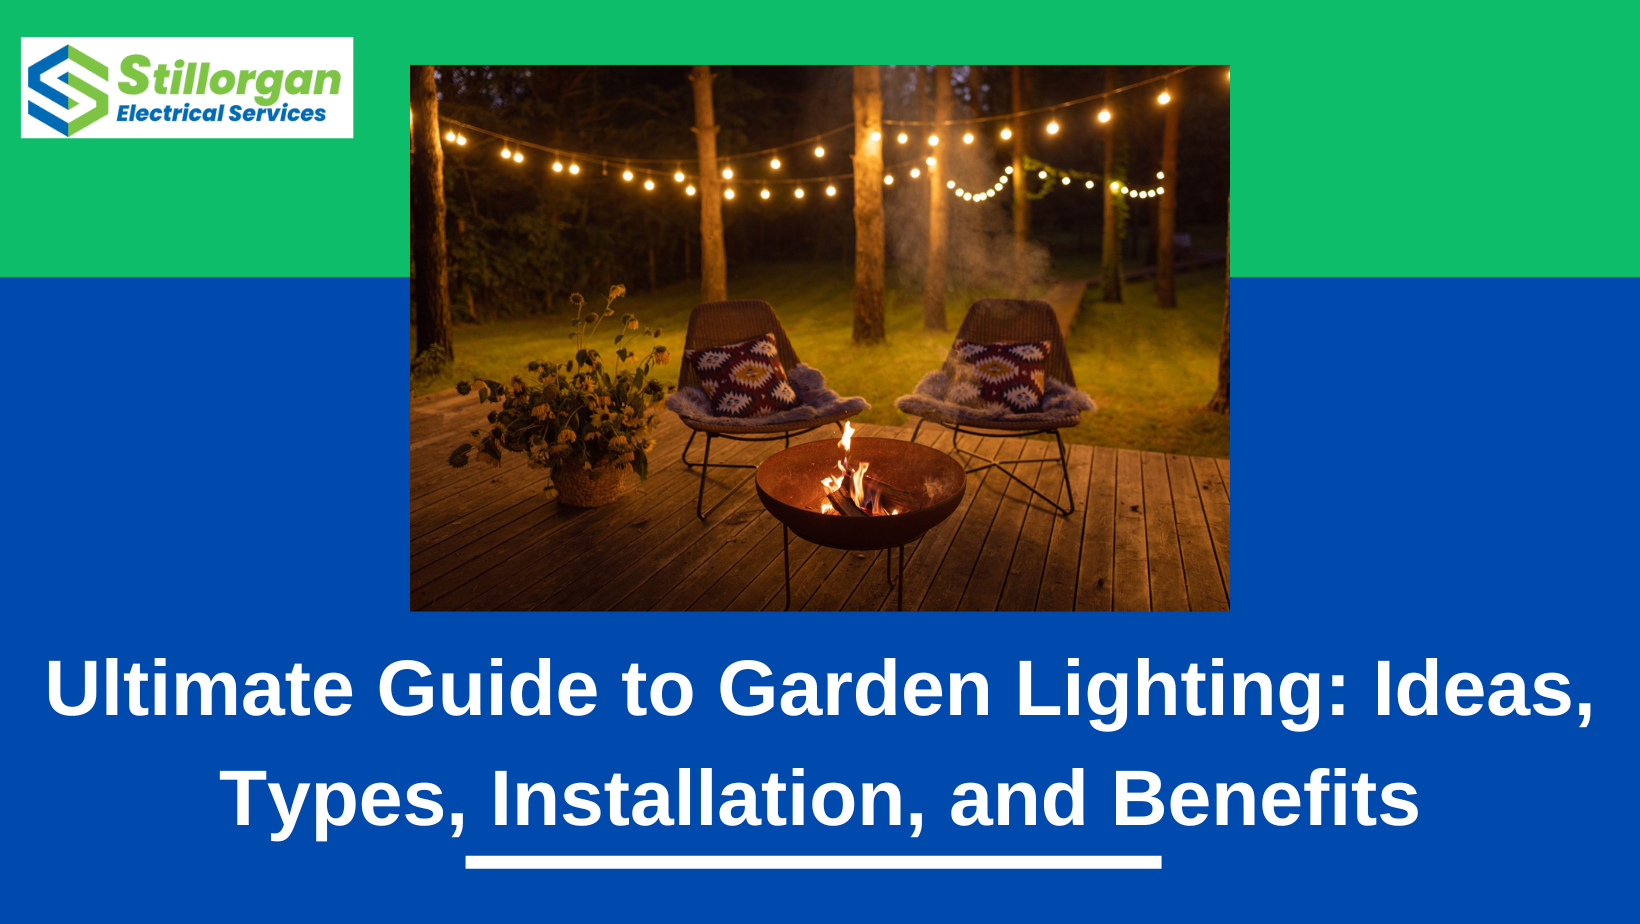 Ultimate Guide to Garden Lighting: Ideas, Types, Installation, and Benefits